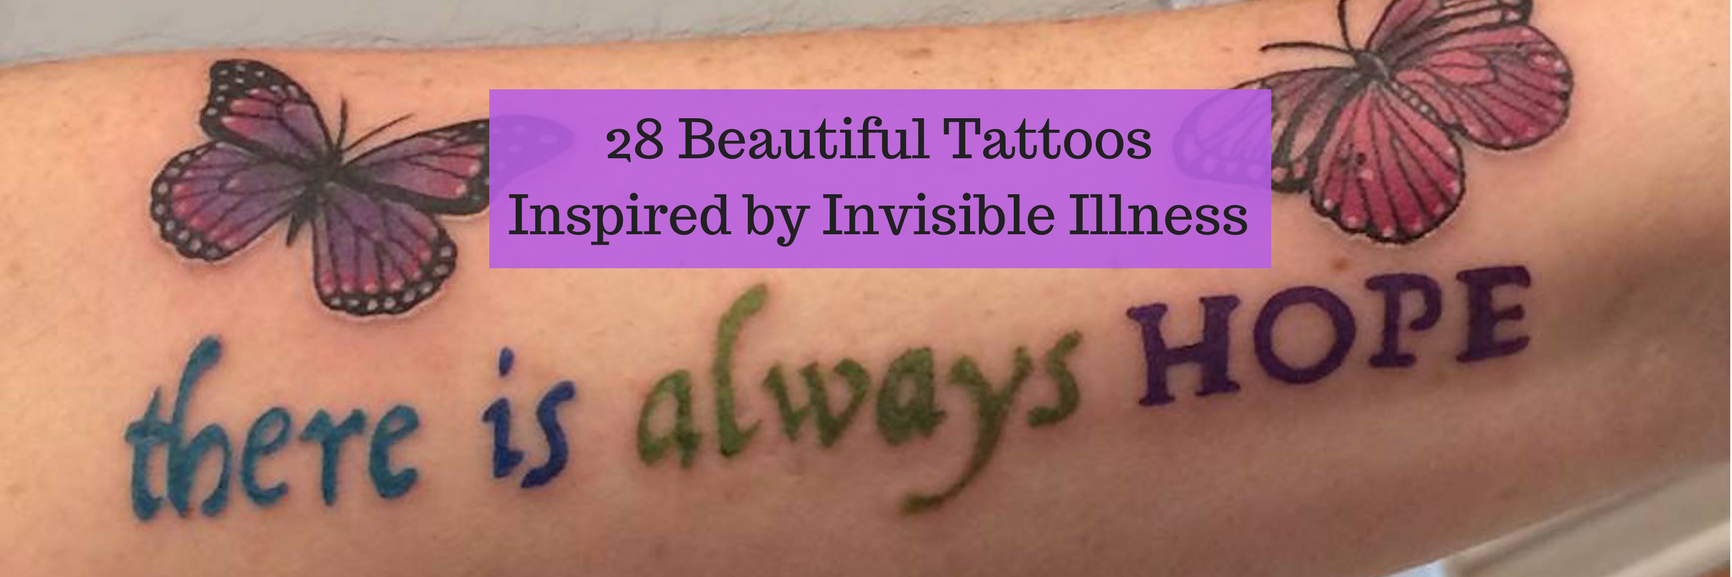 Is it safe for a person with epilepsy to get a tattoo